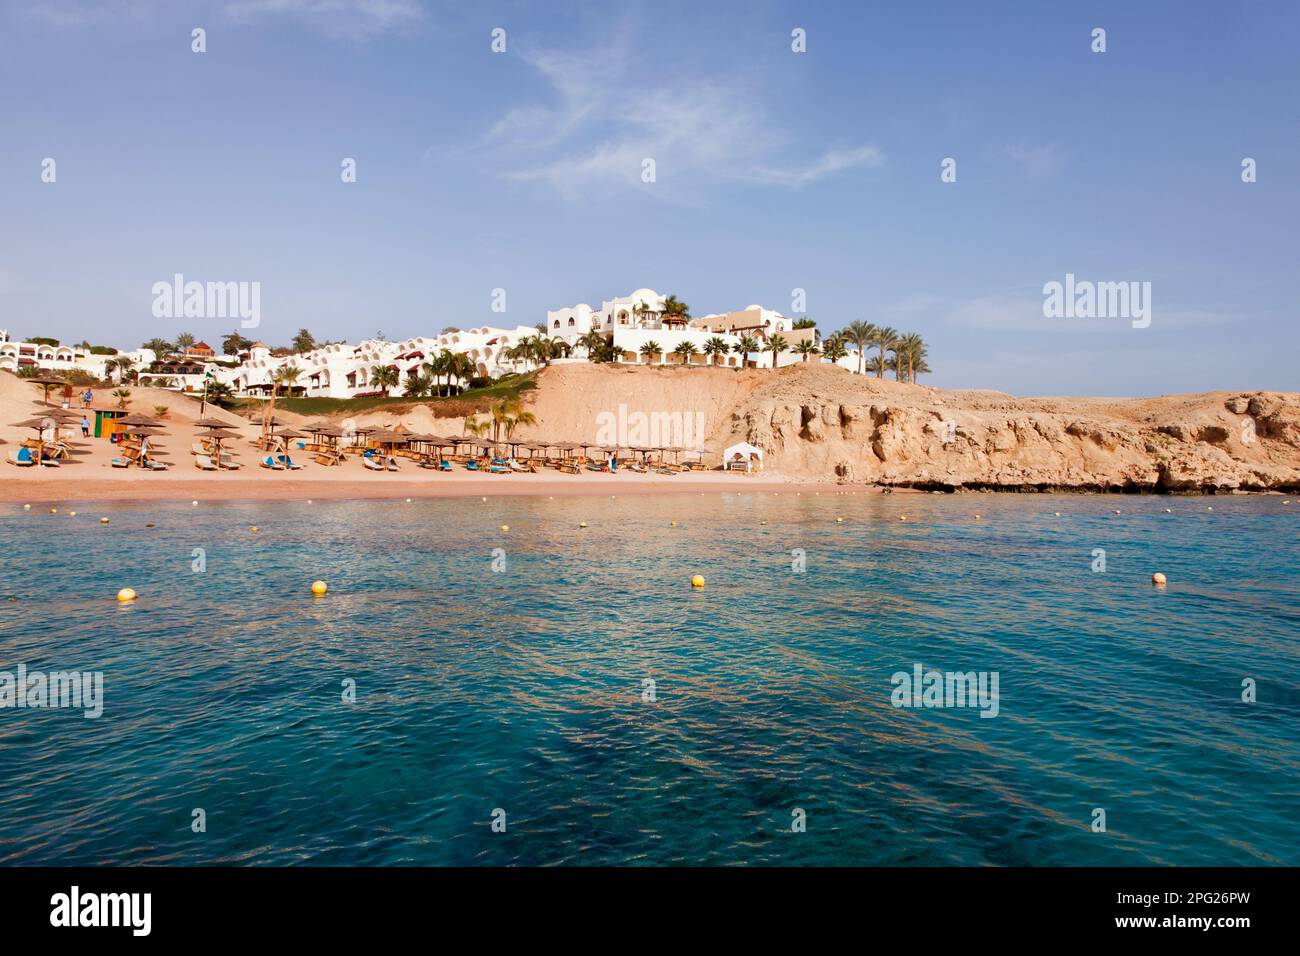 Egypt, Sharm El-Sheik, view of beach and hotels. Stock Photo